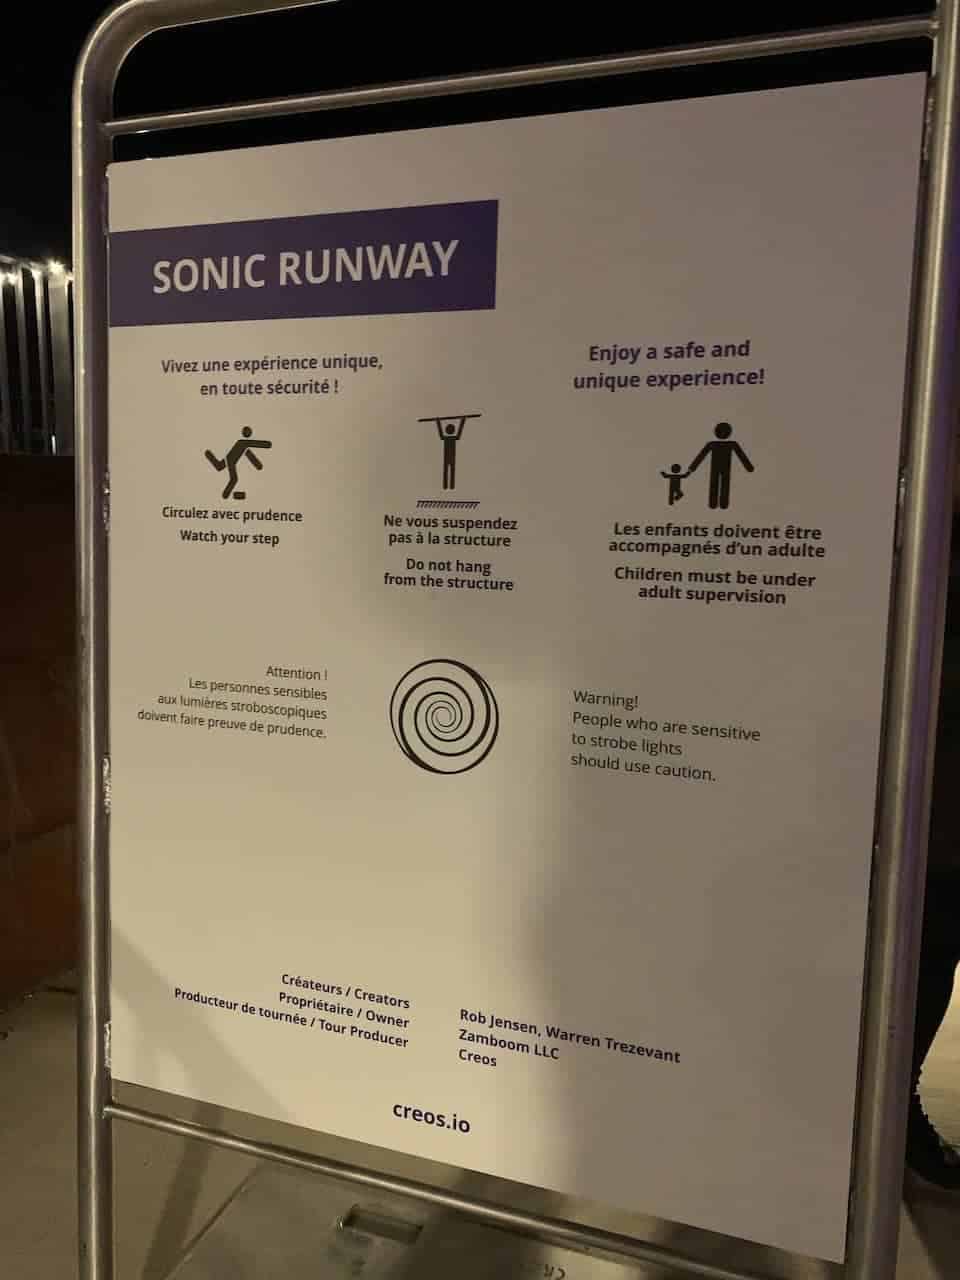 Pier 8 Hamilton Ontario Sonic Runway -  A few key rules and expectations were displayed at the beginning of the walk through the Sonic Runway on Pier 8 in Hamilton, Ontario, Canada.